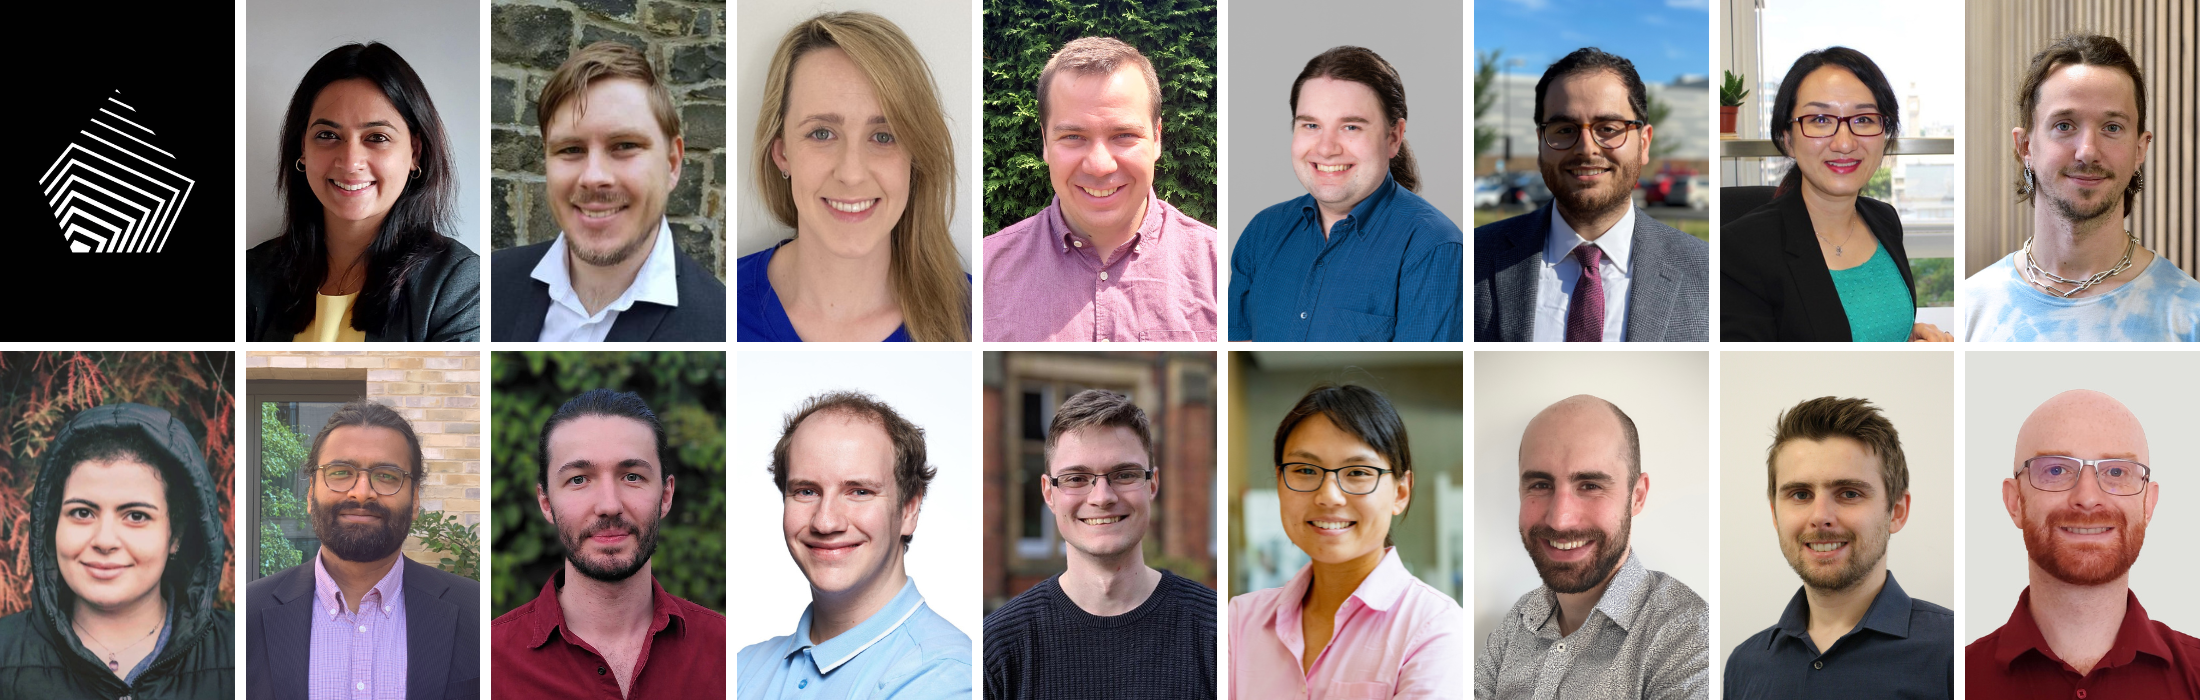 Royal Academy of Engineering Research Fellows 2022